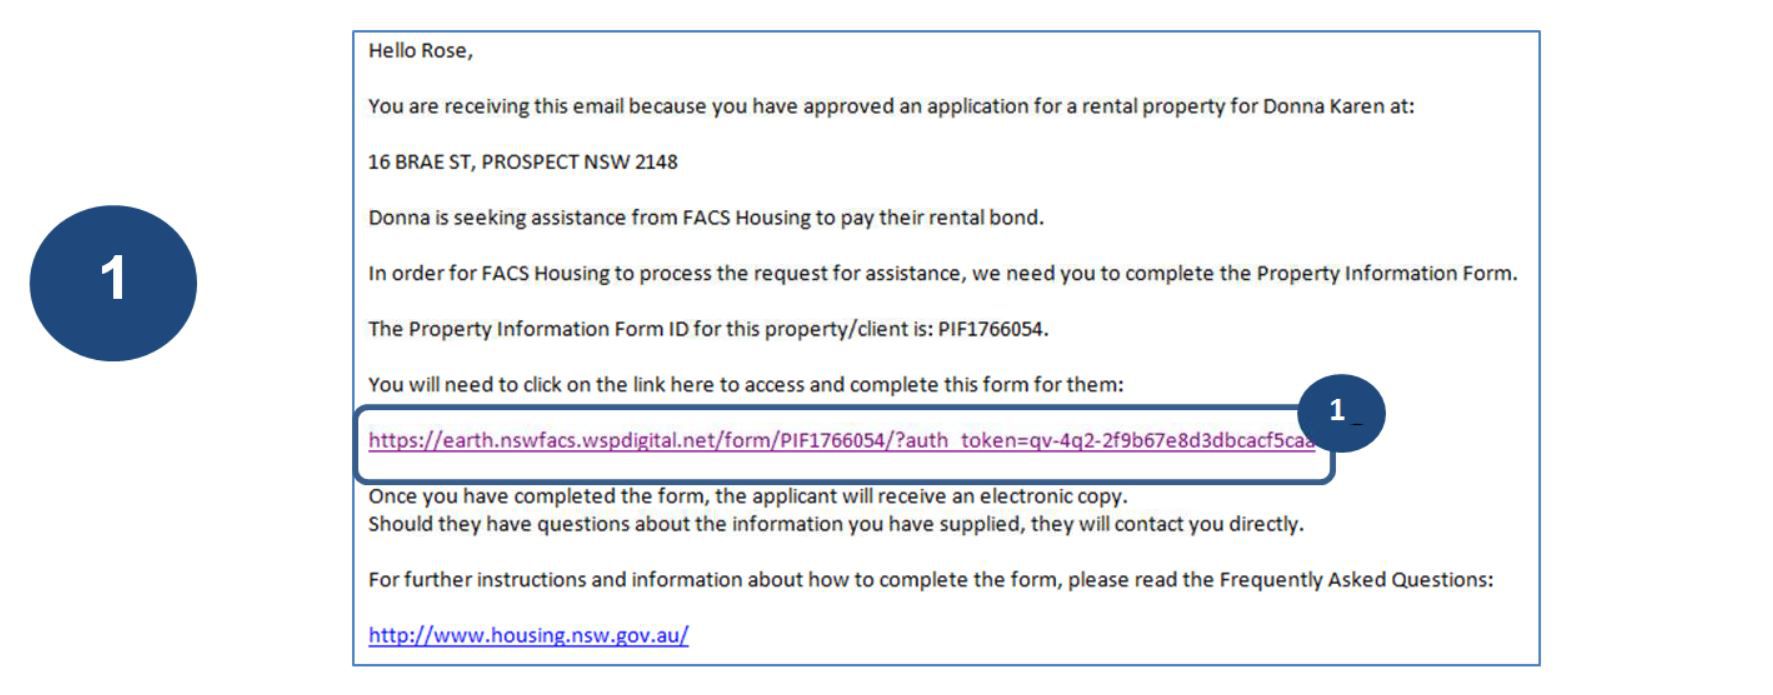 simply click on the link to complete the Property Information form.